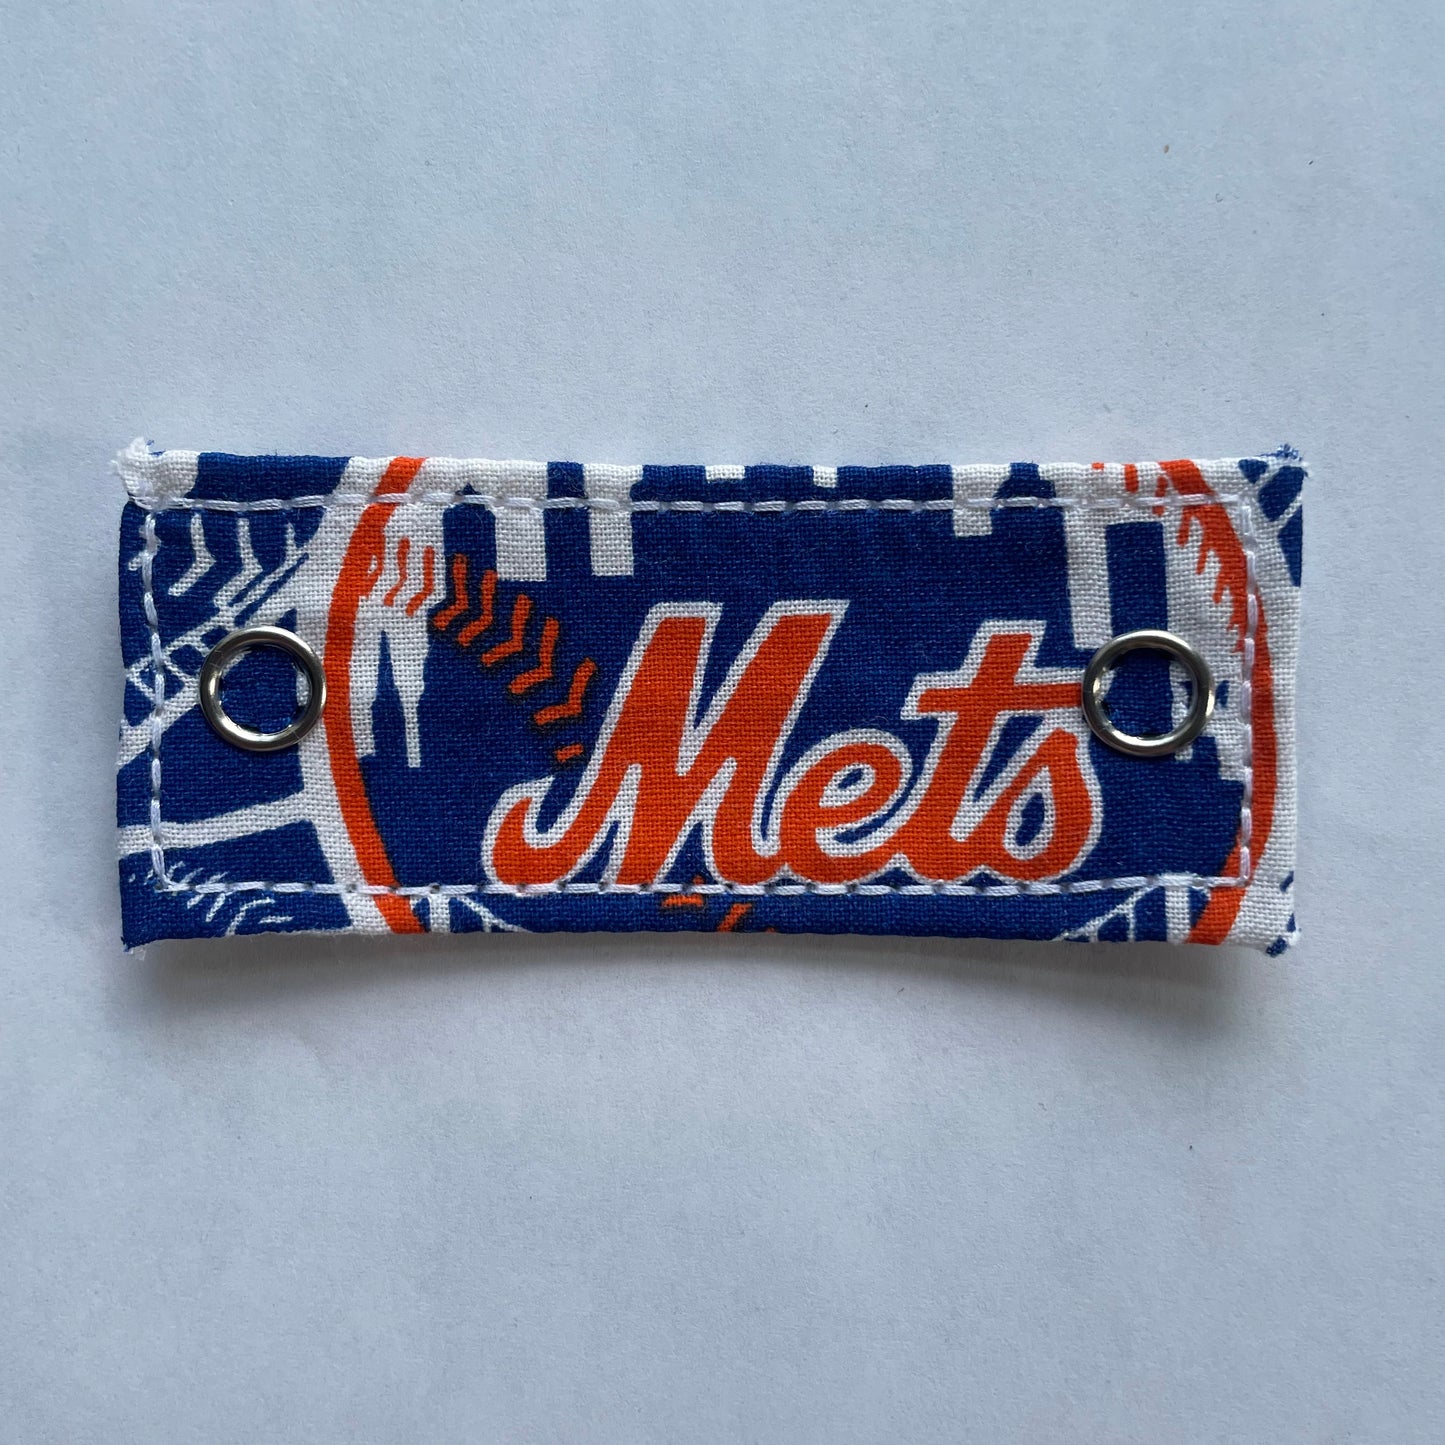 Team Patch | Mets